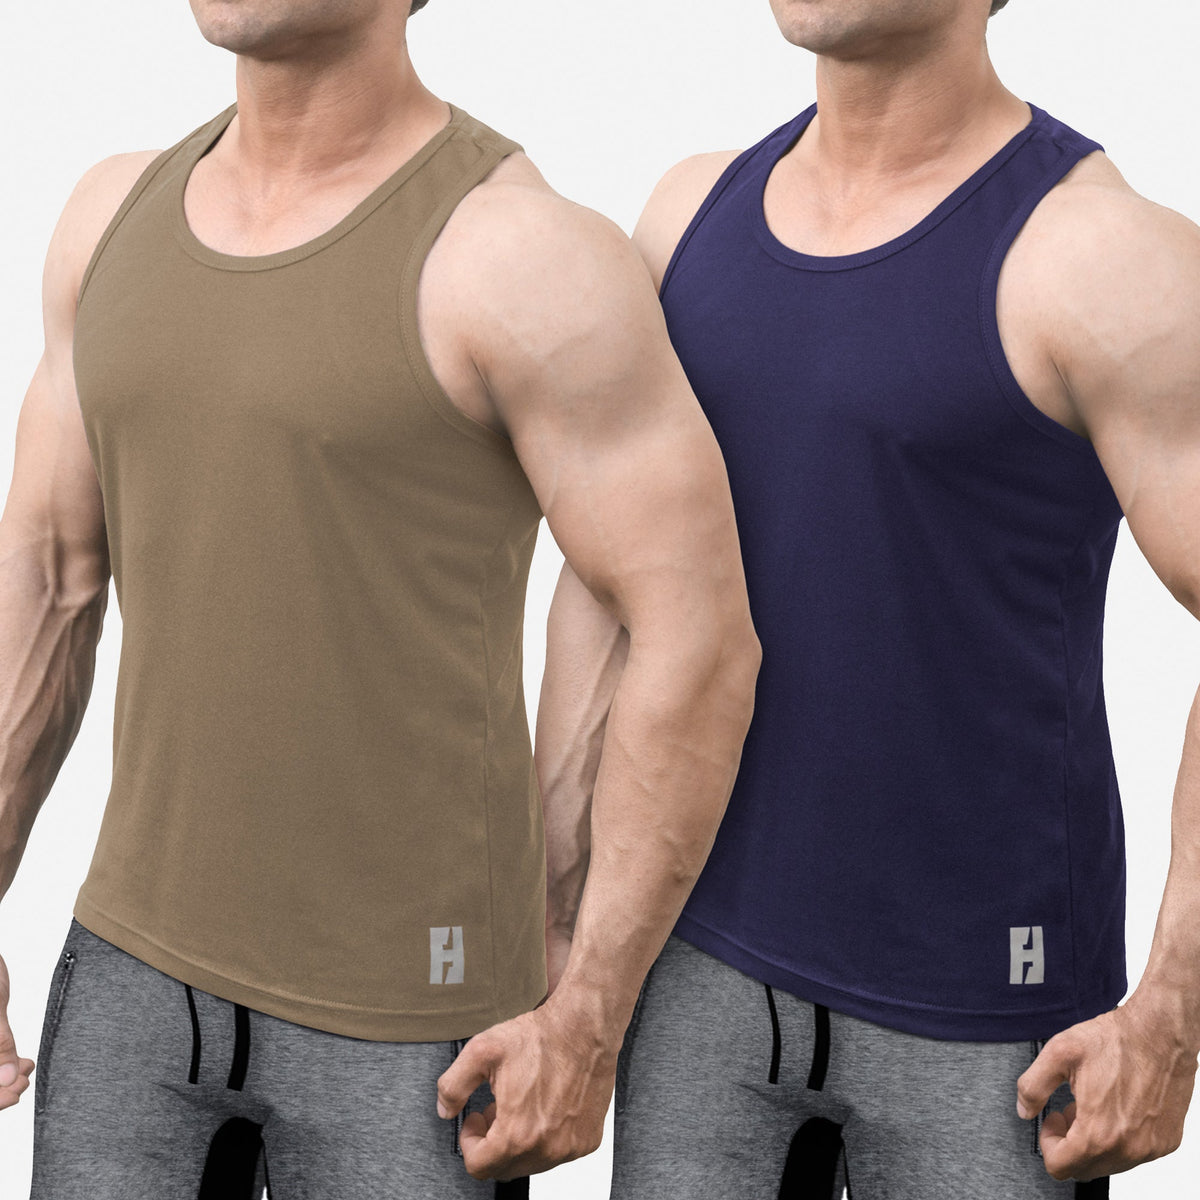 Men's Athleisure Tank Tops Sleeveless T-Shirts For Workout - Pack of 2